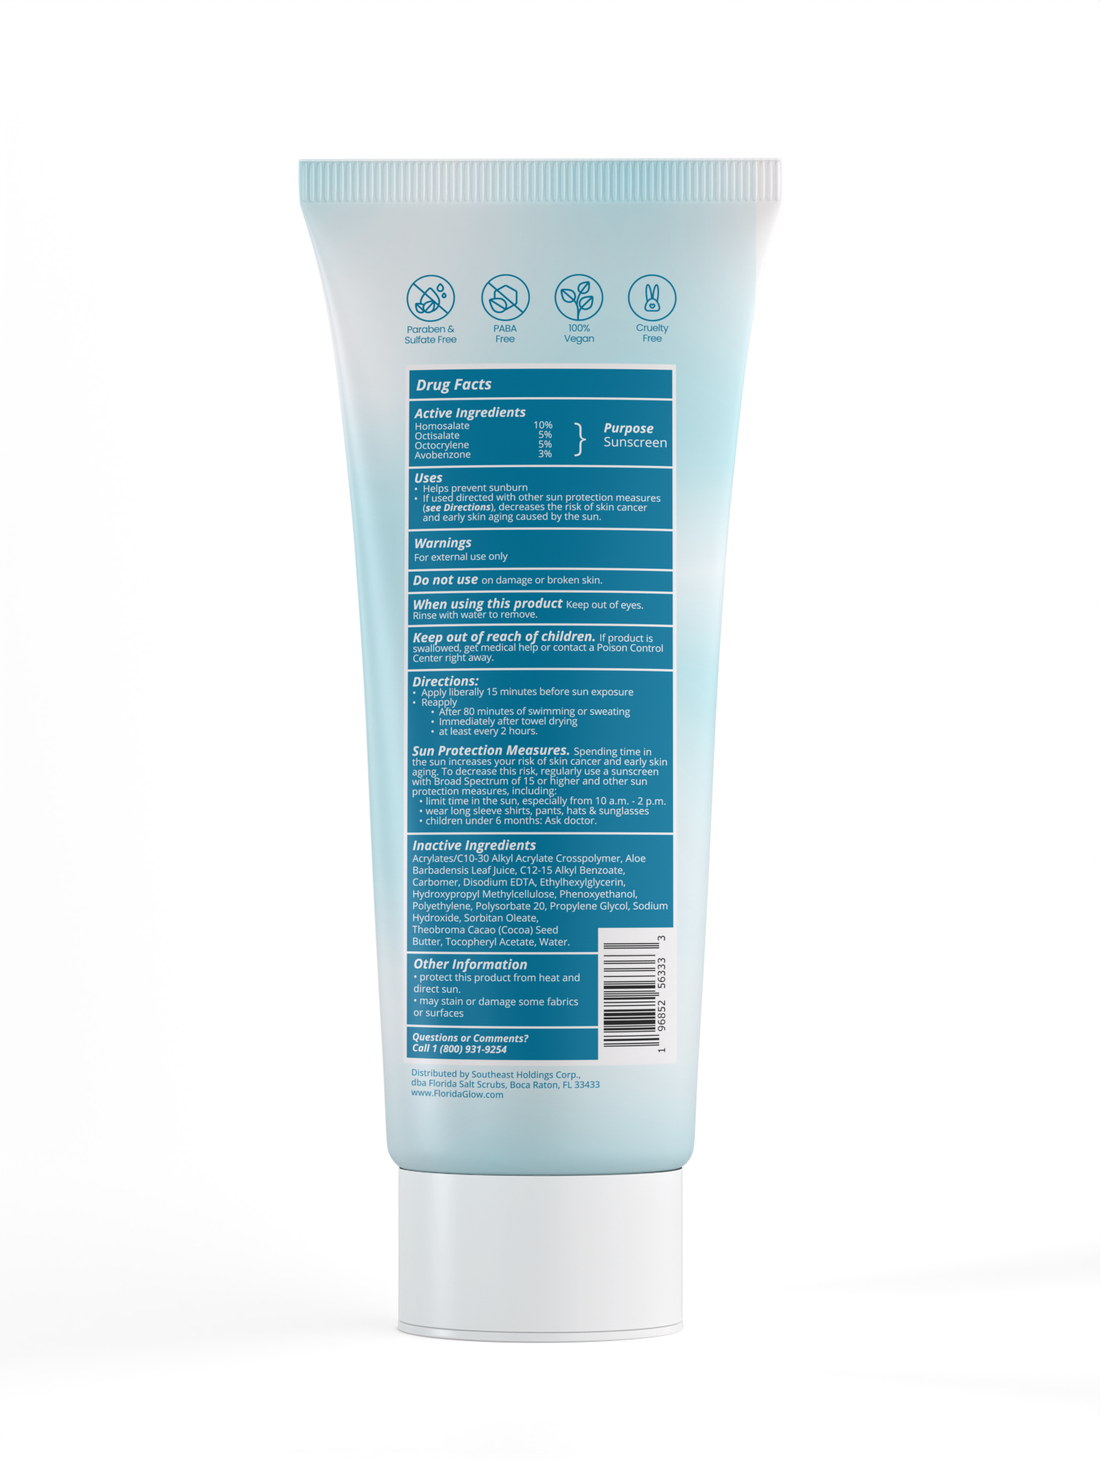 Face And Body Lotion - SPF 50